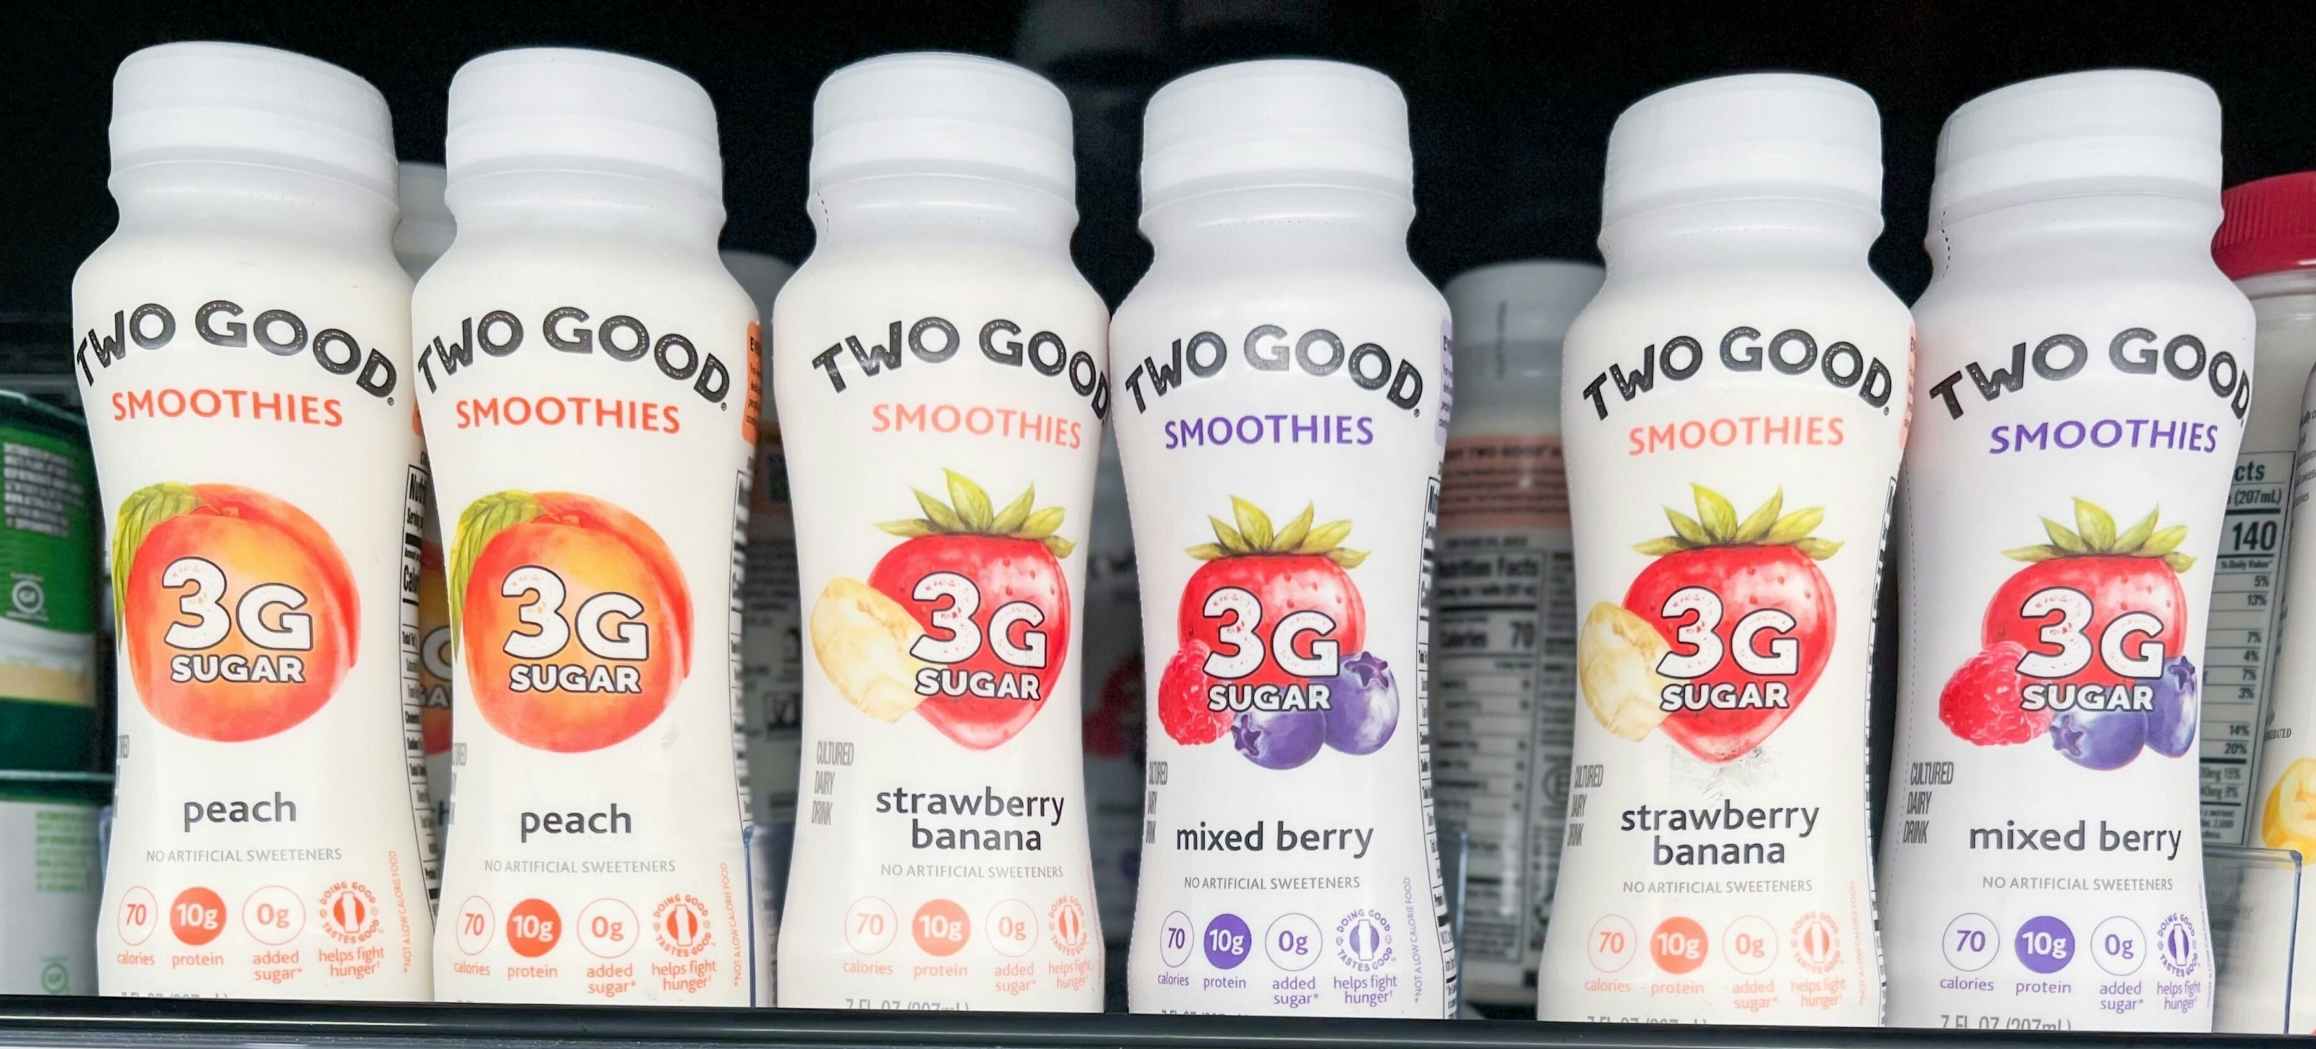 Two Good Smoothies on shelf with sales tag underneath